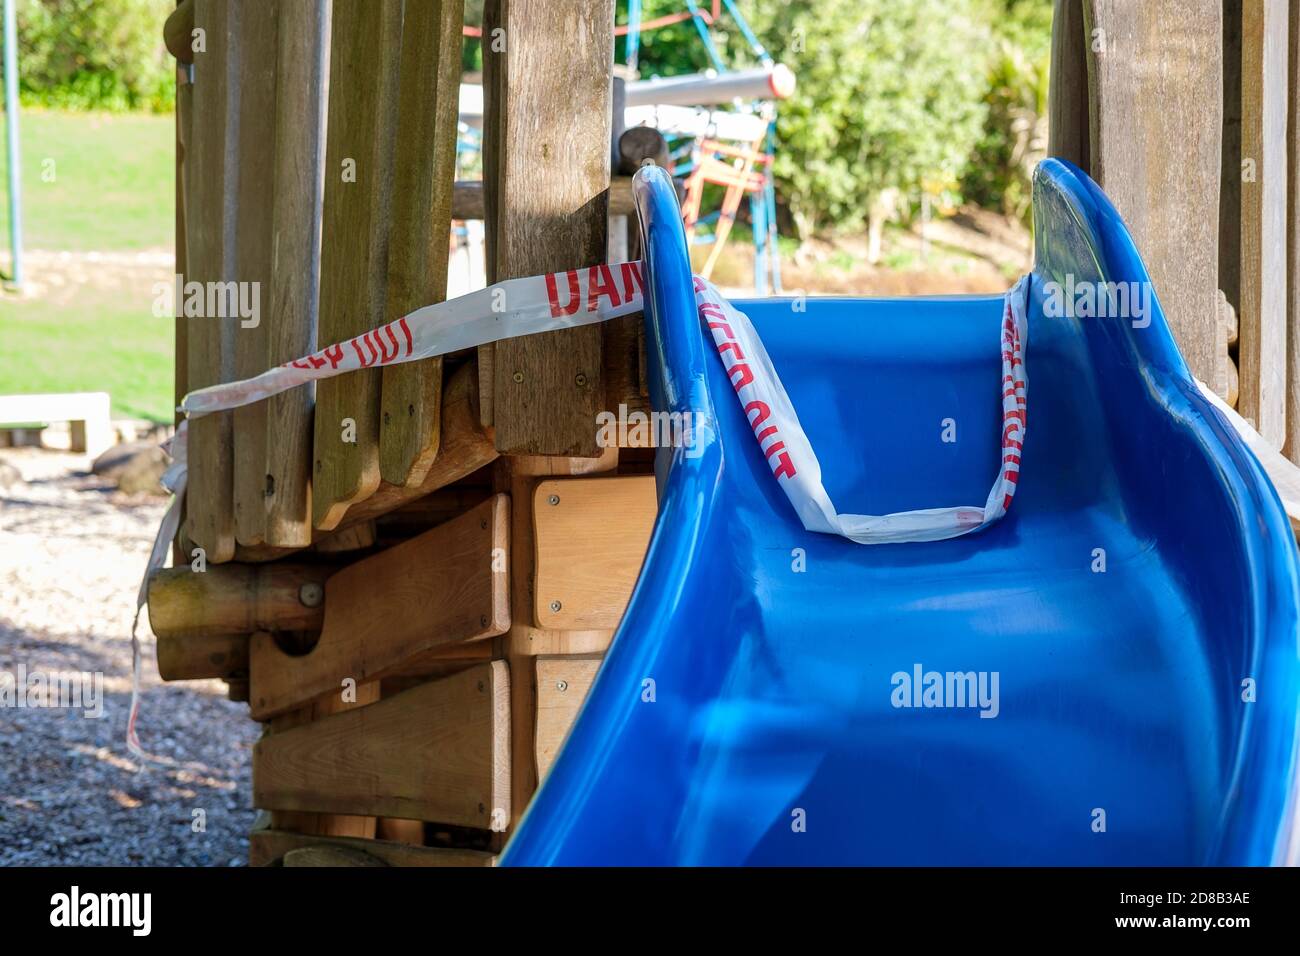 closed slide in a playground, COVID-19 Stock Photo